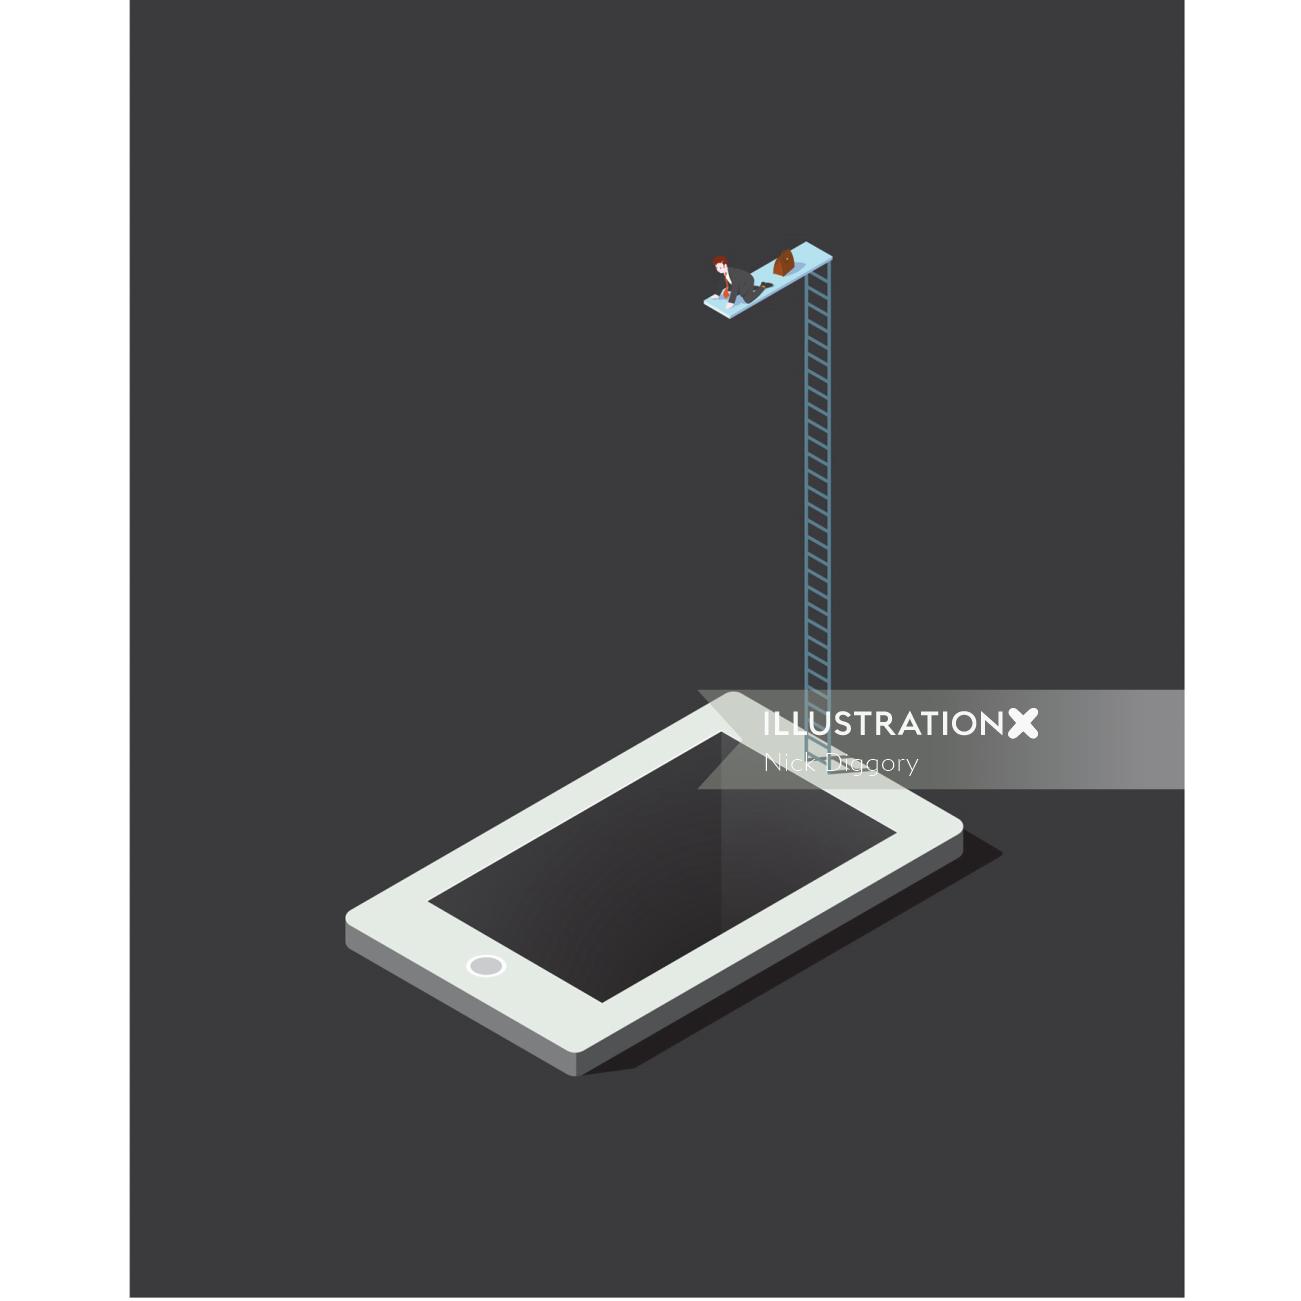 Vector graphic man jumping into iphone
